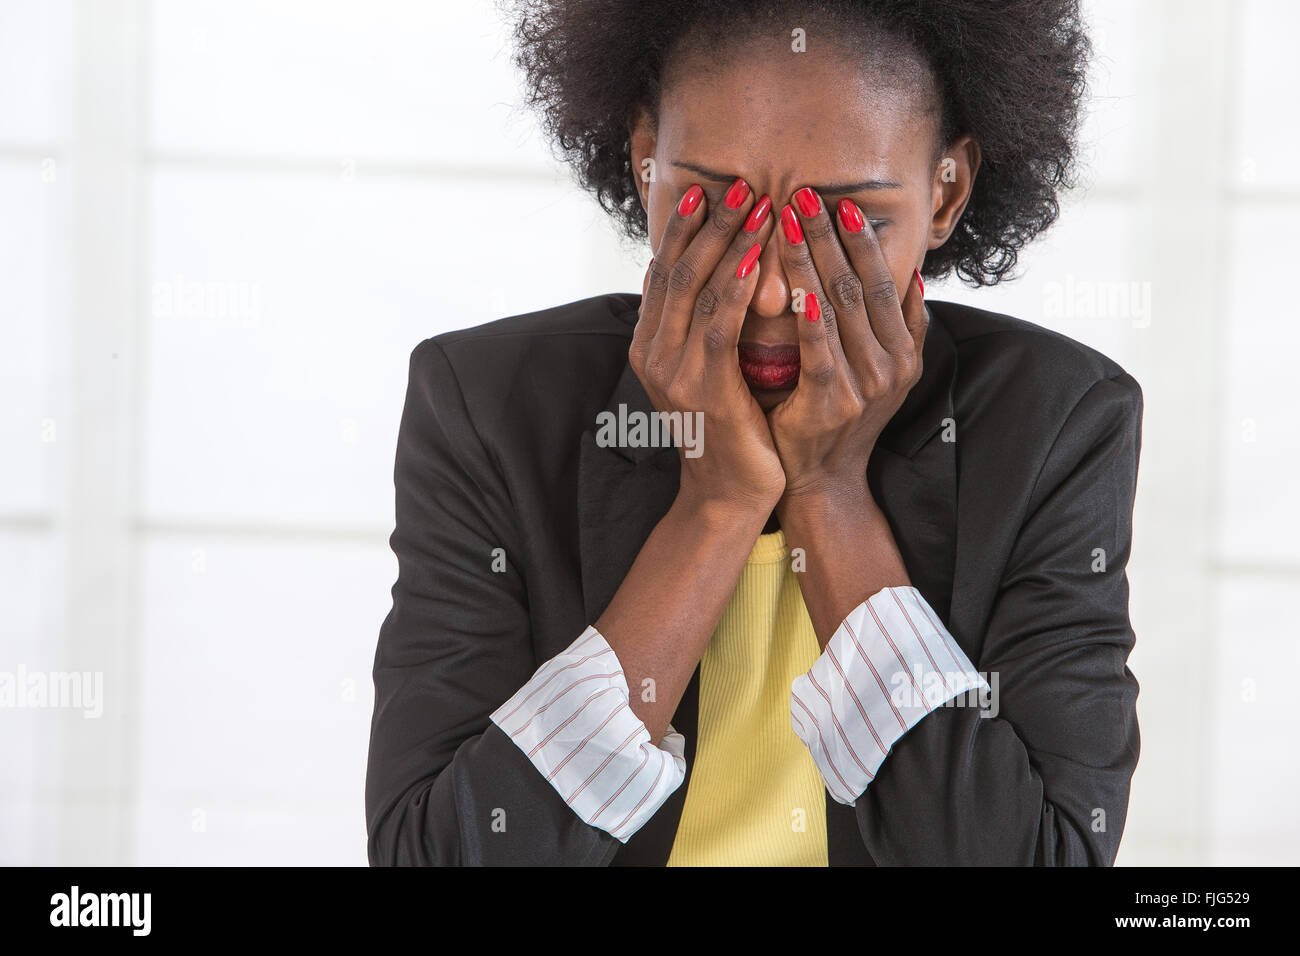 Portrait of mature black woman stressed at work Stock Photo